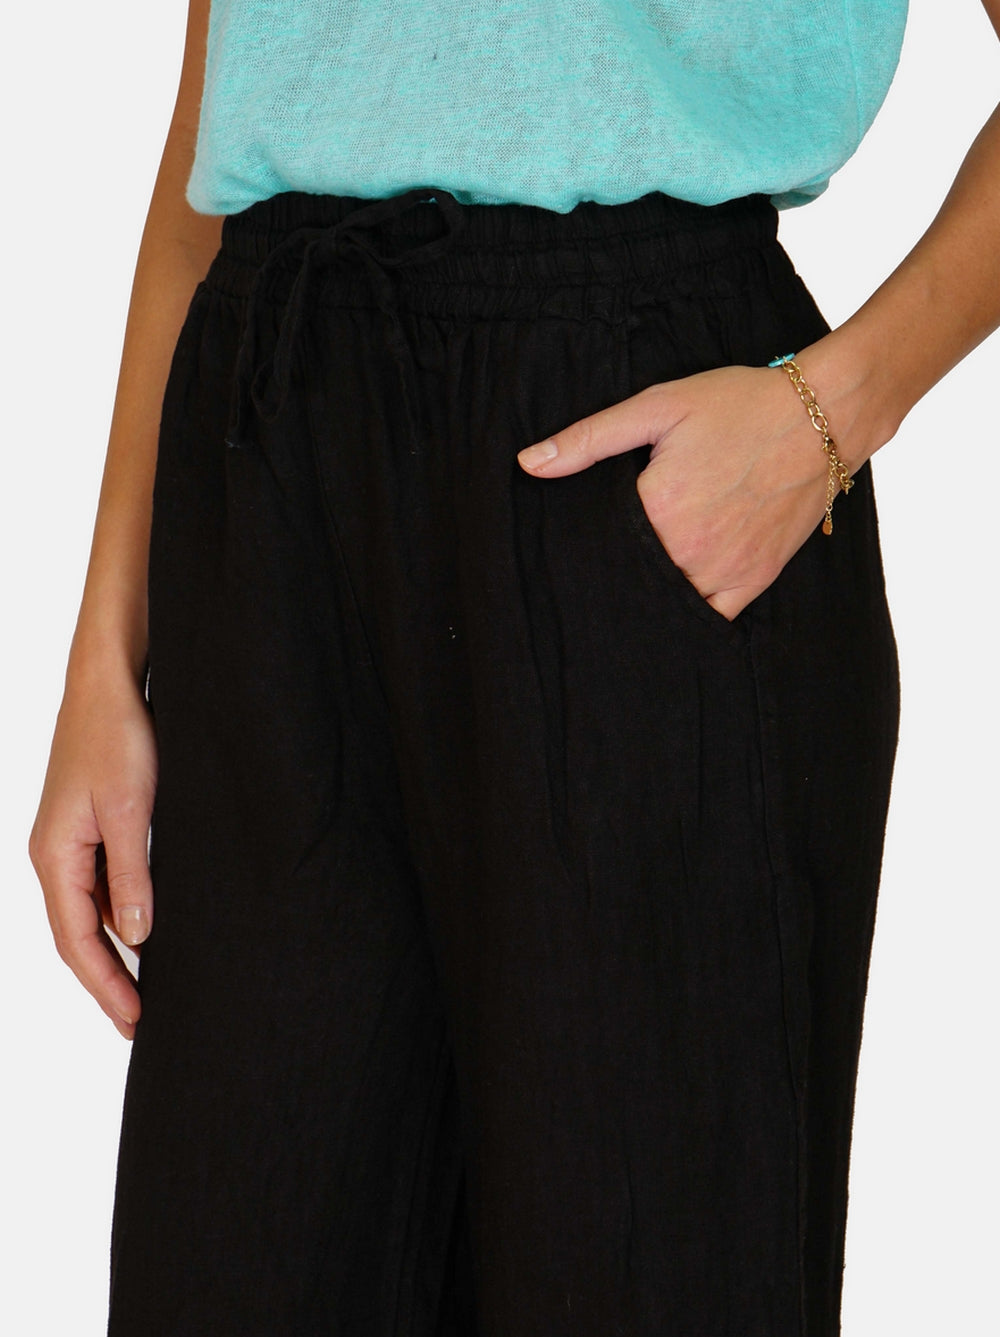 Pants in elastic and lacy high waist, pockets on the sides